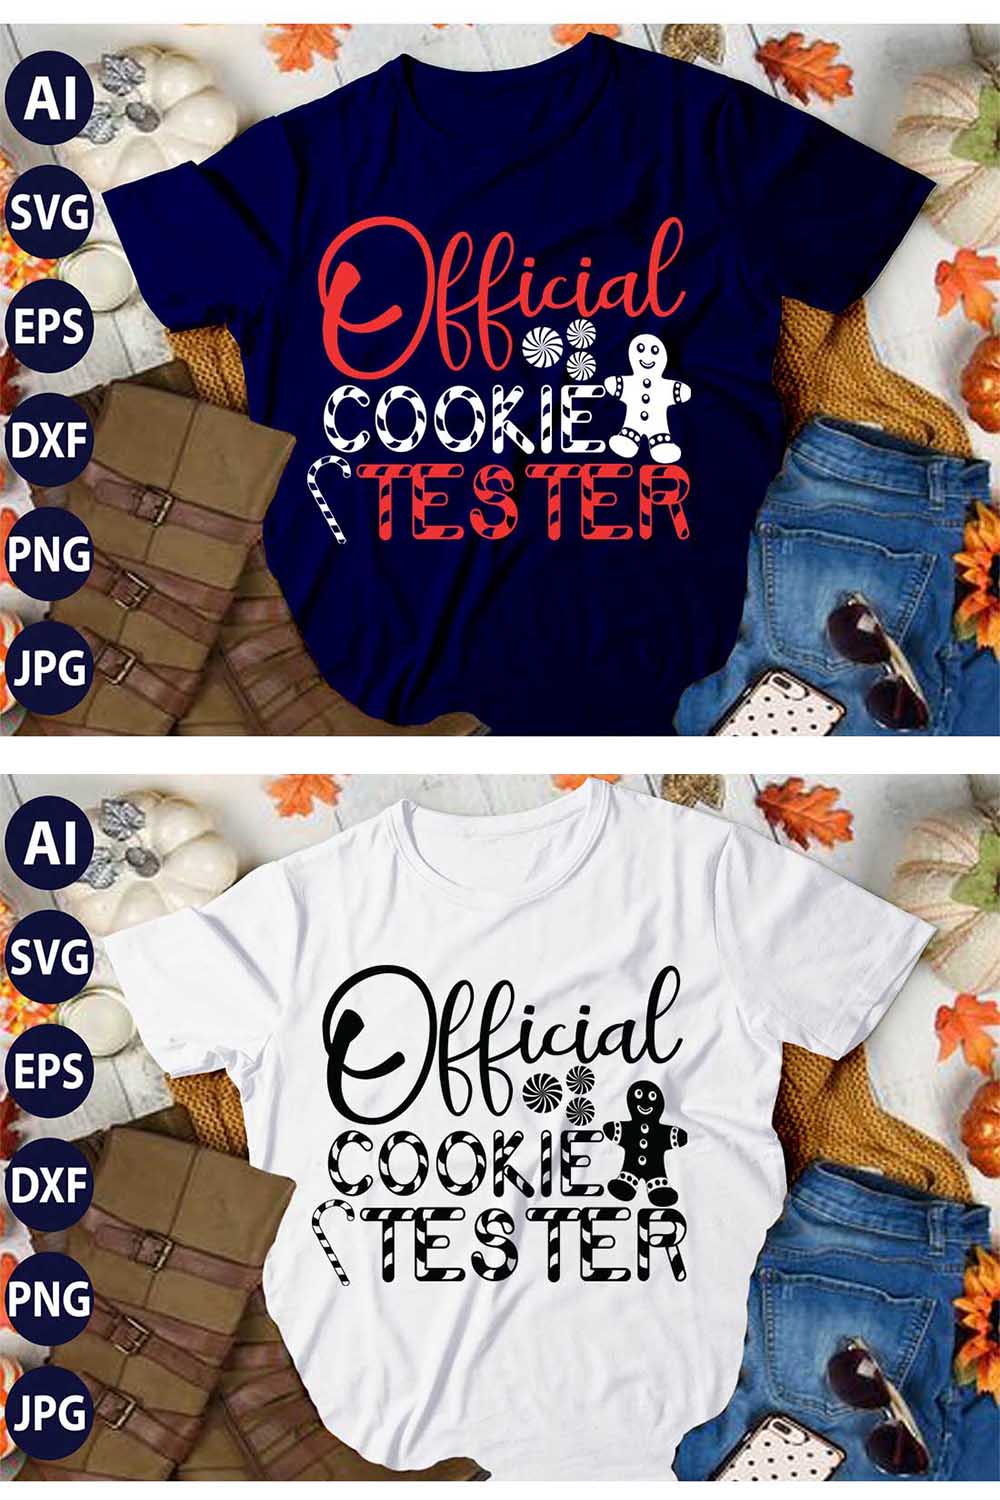 Official Cookie Tester all, SVG T-Shirt Design |Christmas It's All About Jesus Typography Tshirt Design | Ai, Svg, Eps, Dxf, Jpeg, Png, Instant download T-Shirt | 100% print-ready Digital vector file pinterest preview image.